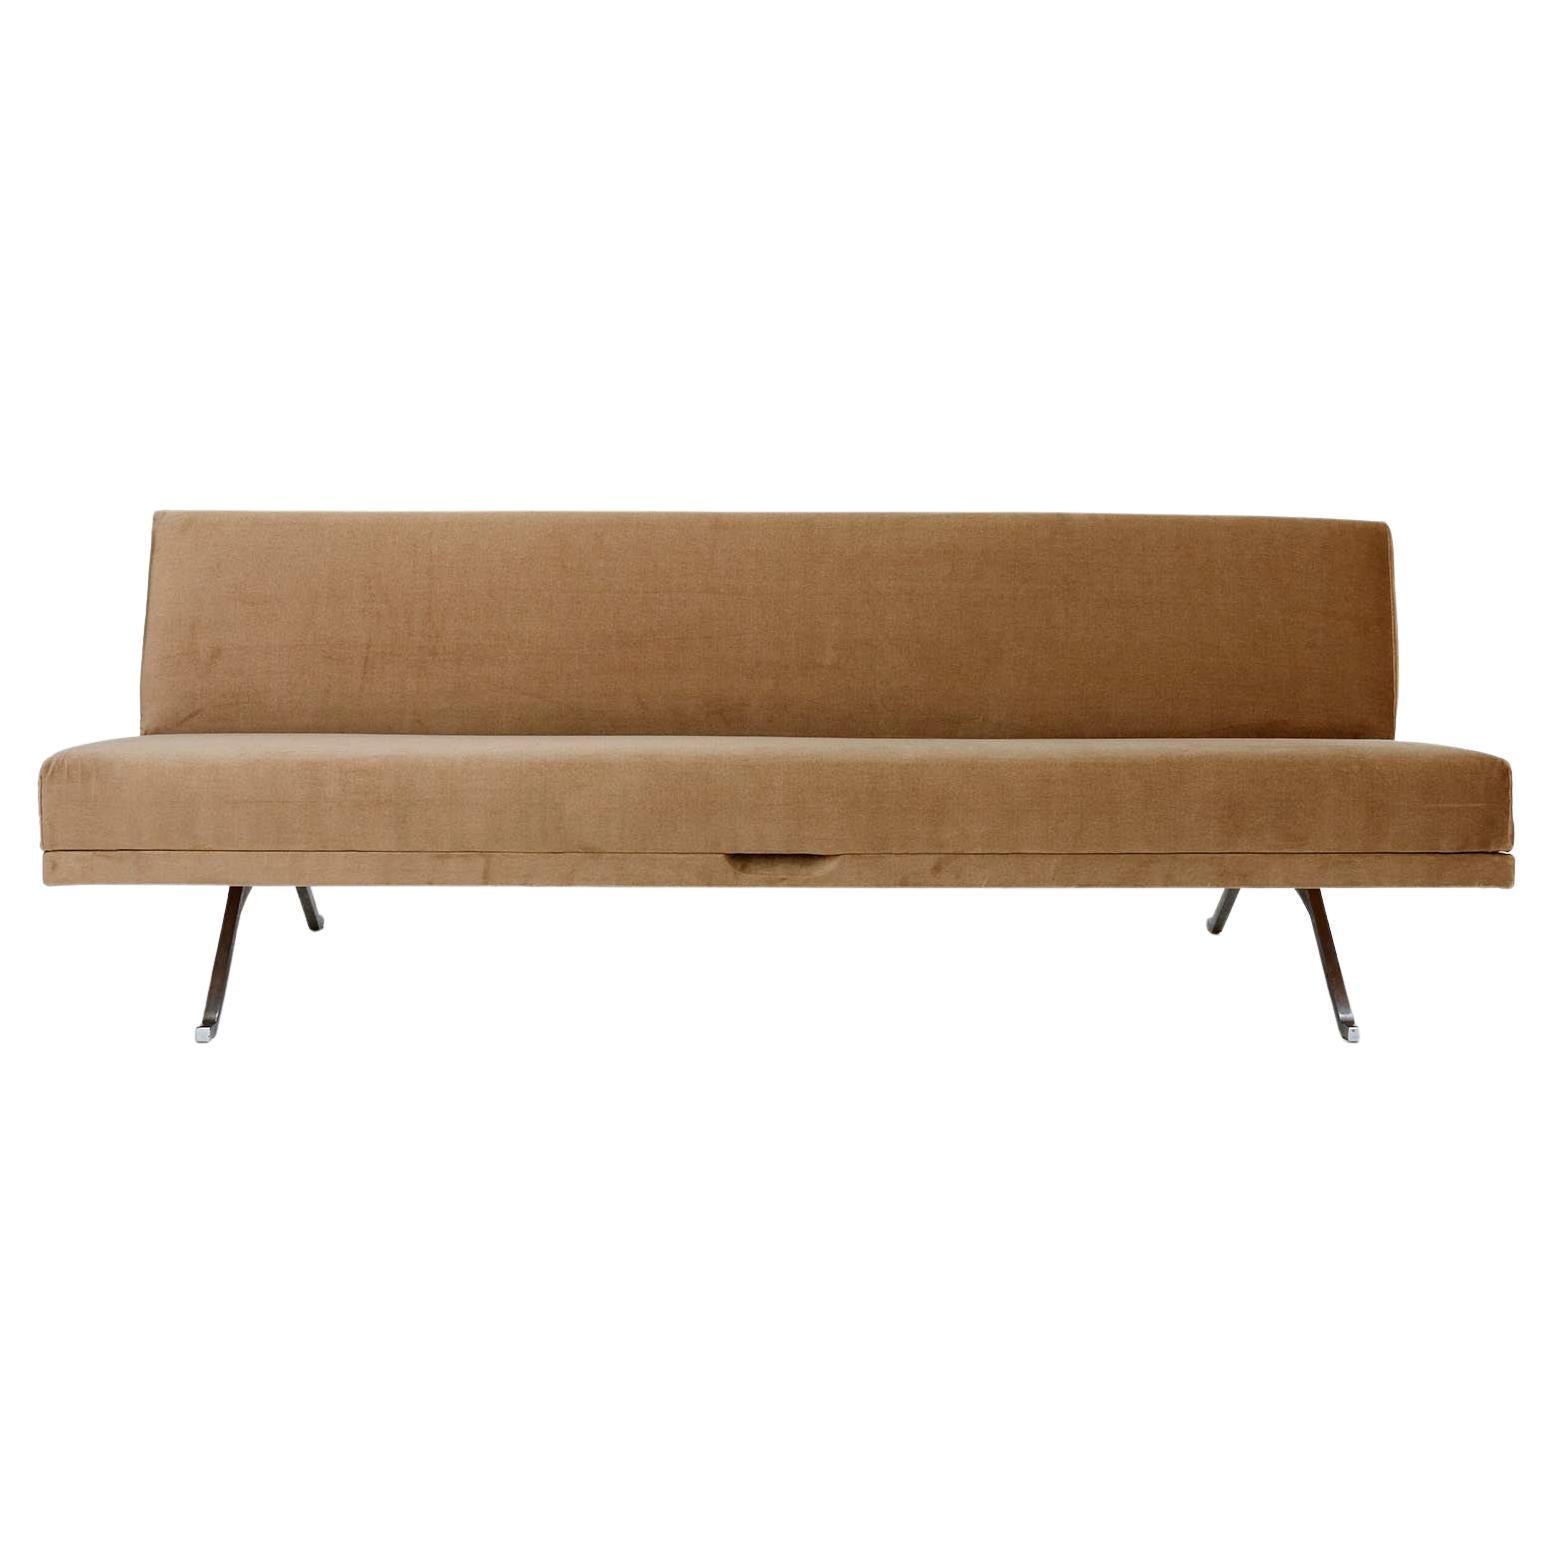 A freestanding sofa model 'Constanze' / 'Constance' with chnromed or nickeled steel and a velvet in a warm neutral tone (beige or sand) designed by Prof. Johannes Spalt for Wittmann, Austria, manufactured in midcentury, circa 1970.
By one hand